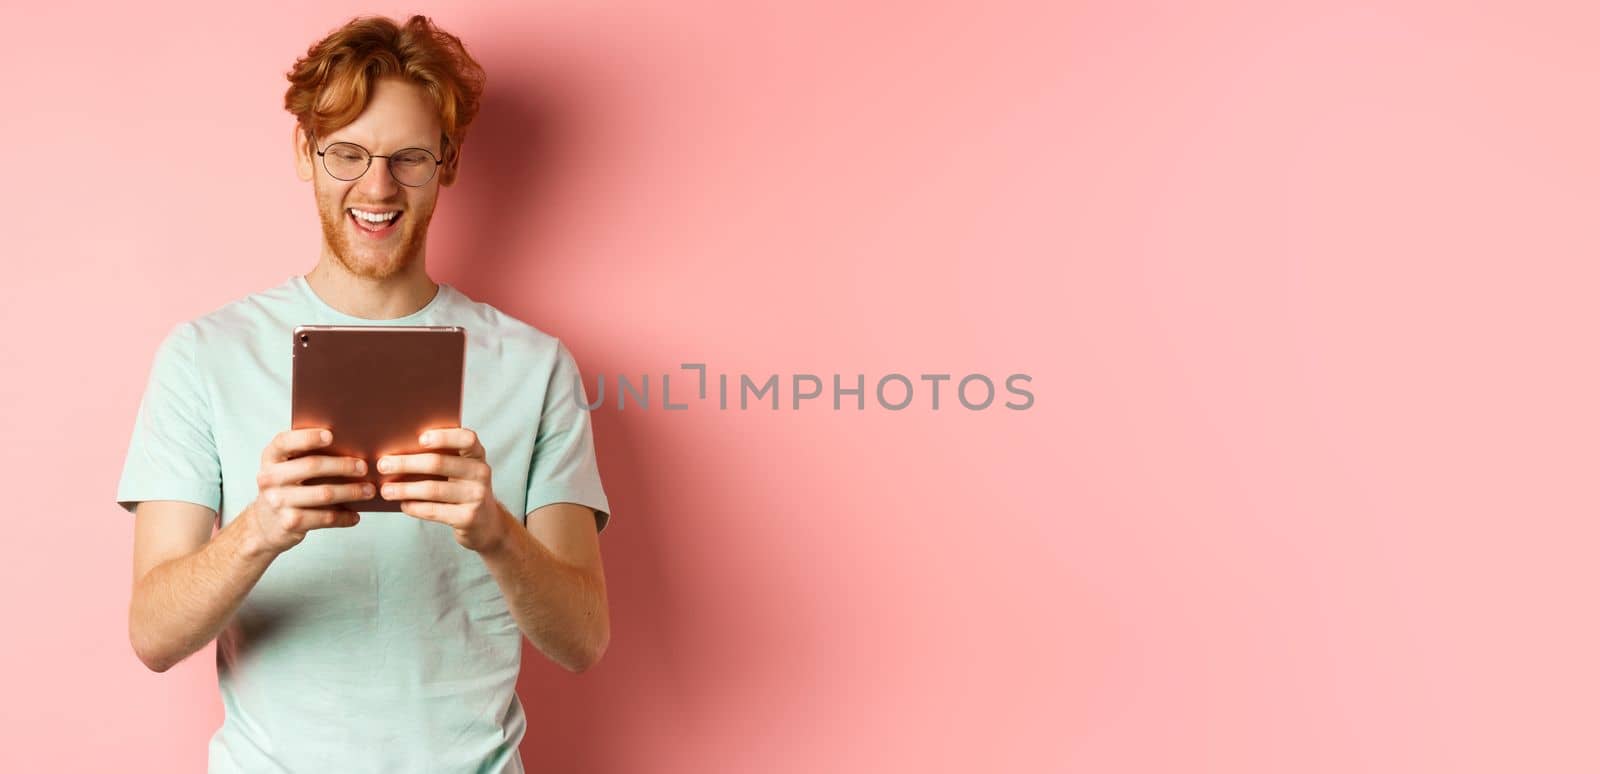 Happy guy with red hair and beard using digital tablet, reading screen and smiling, standing over pink background.